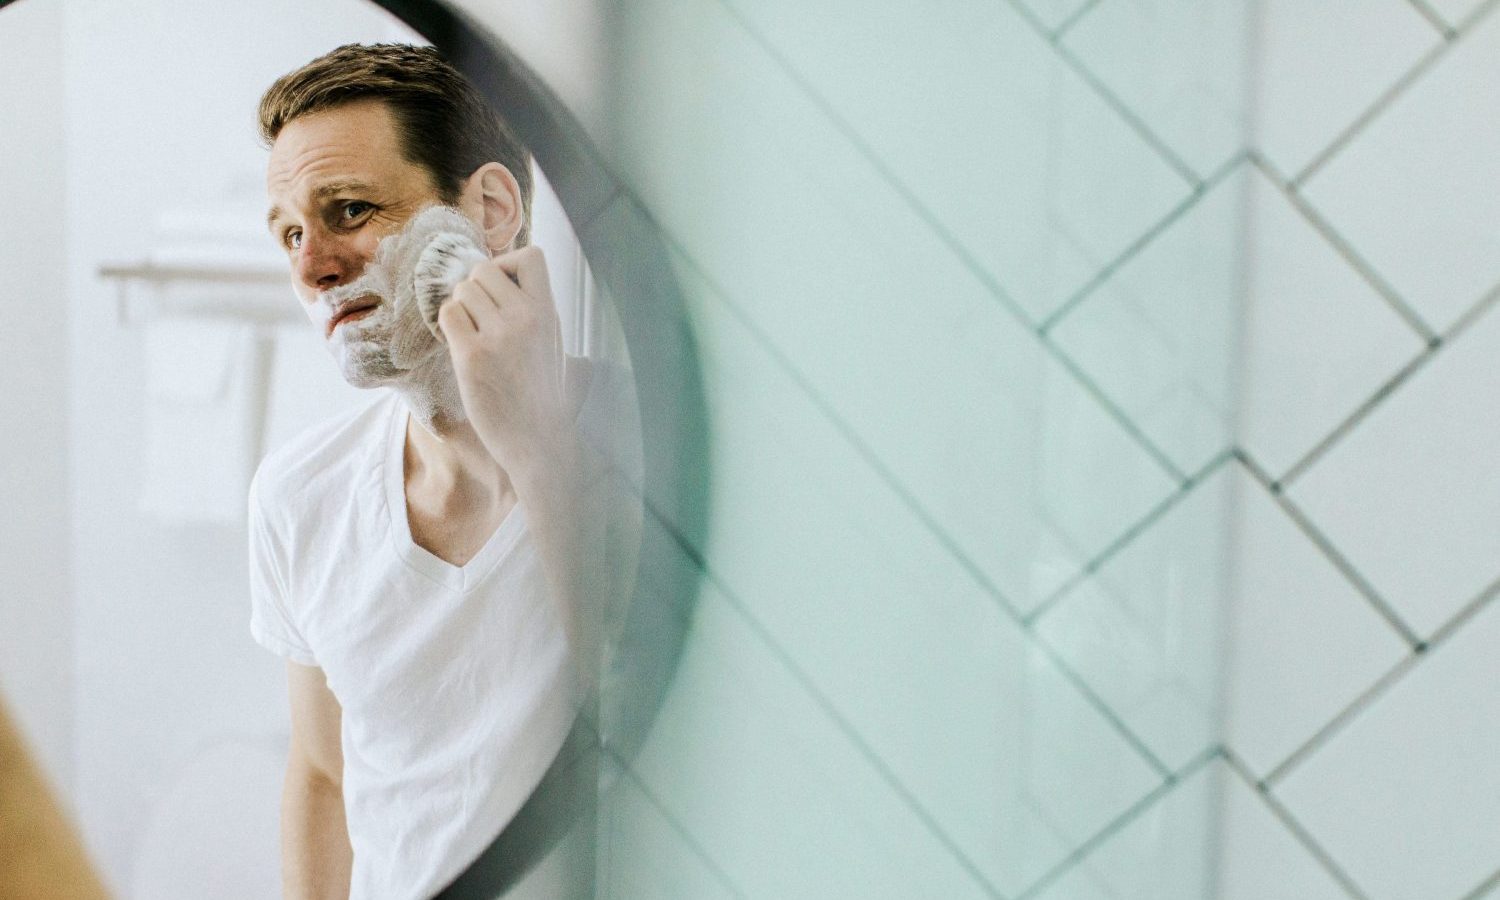 Shaving Myths To Ditch Before Your Next Video Conference